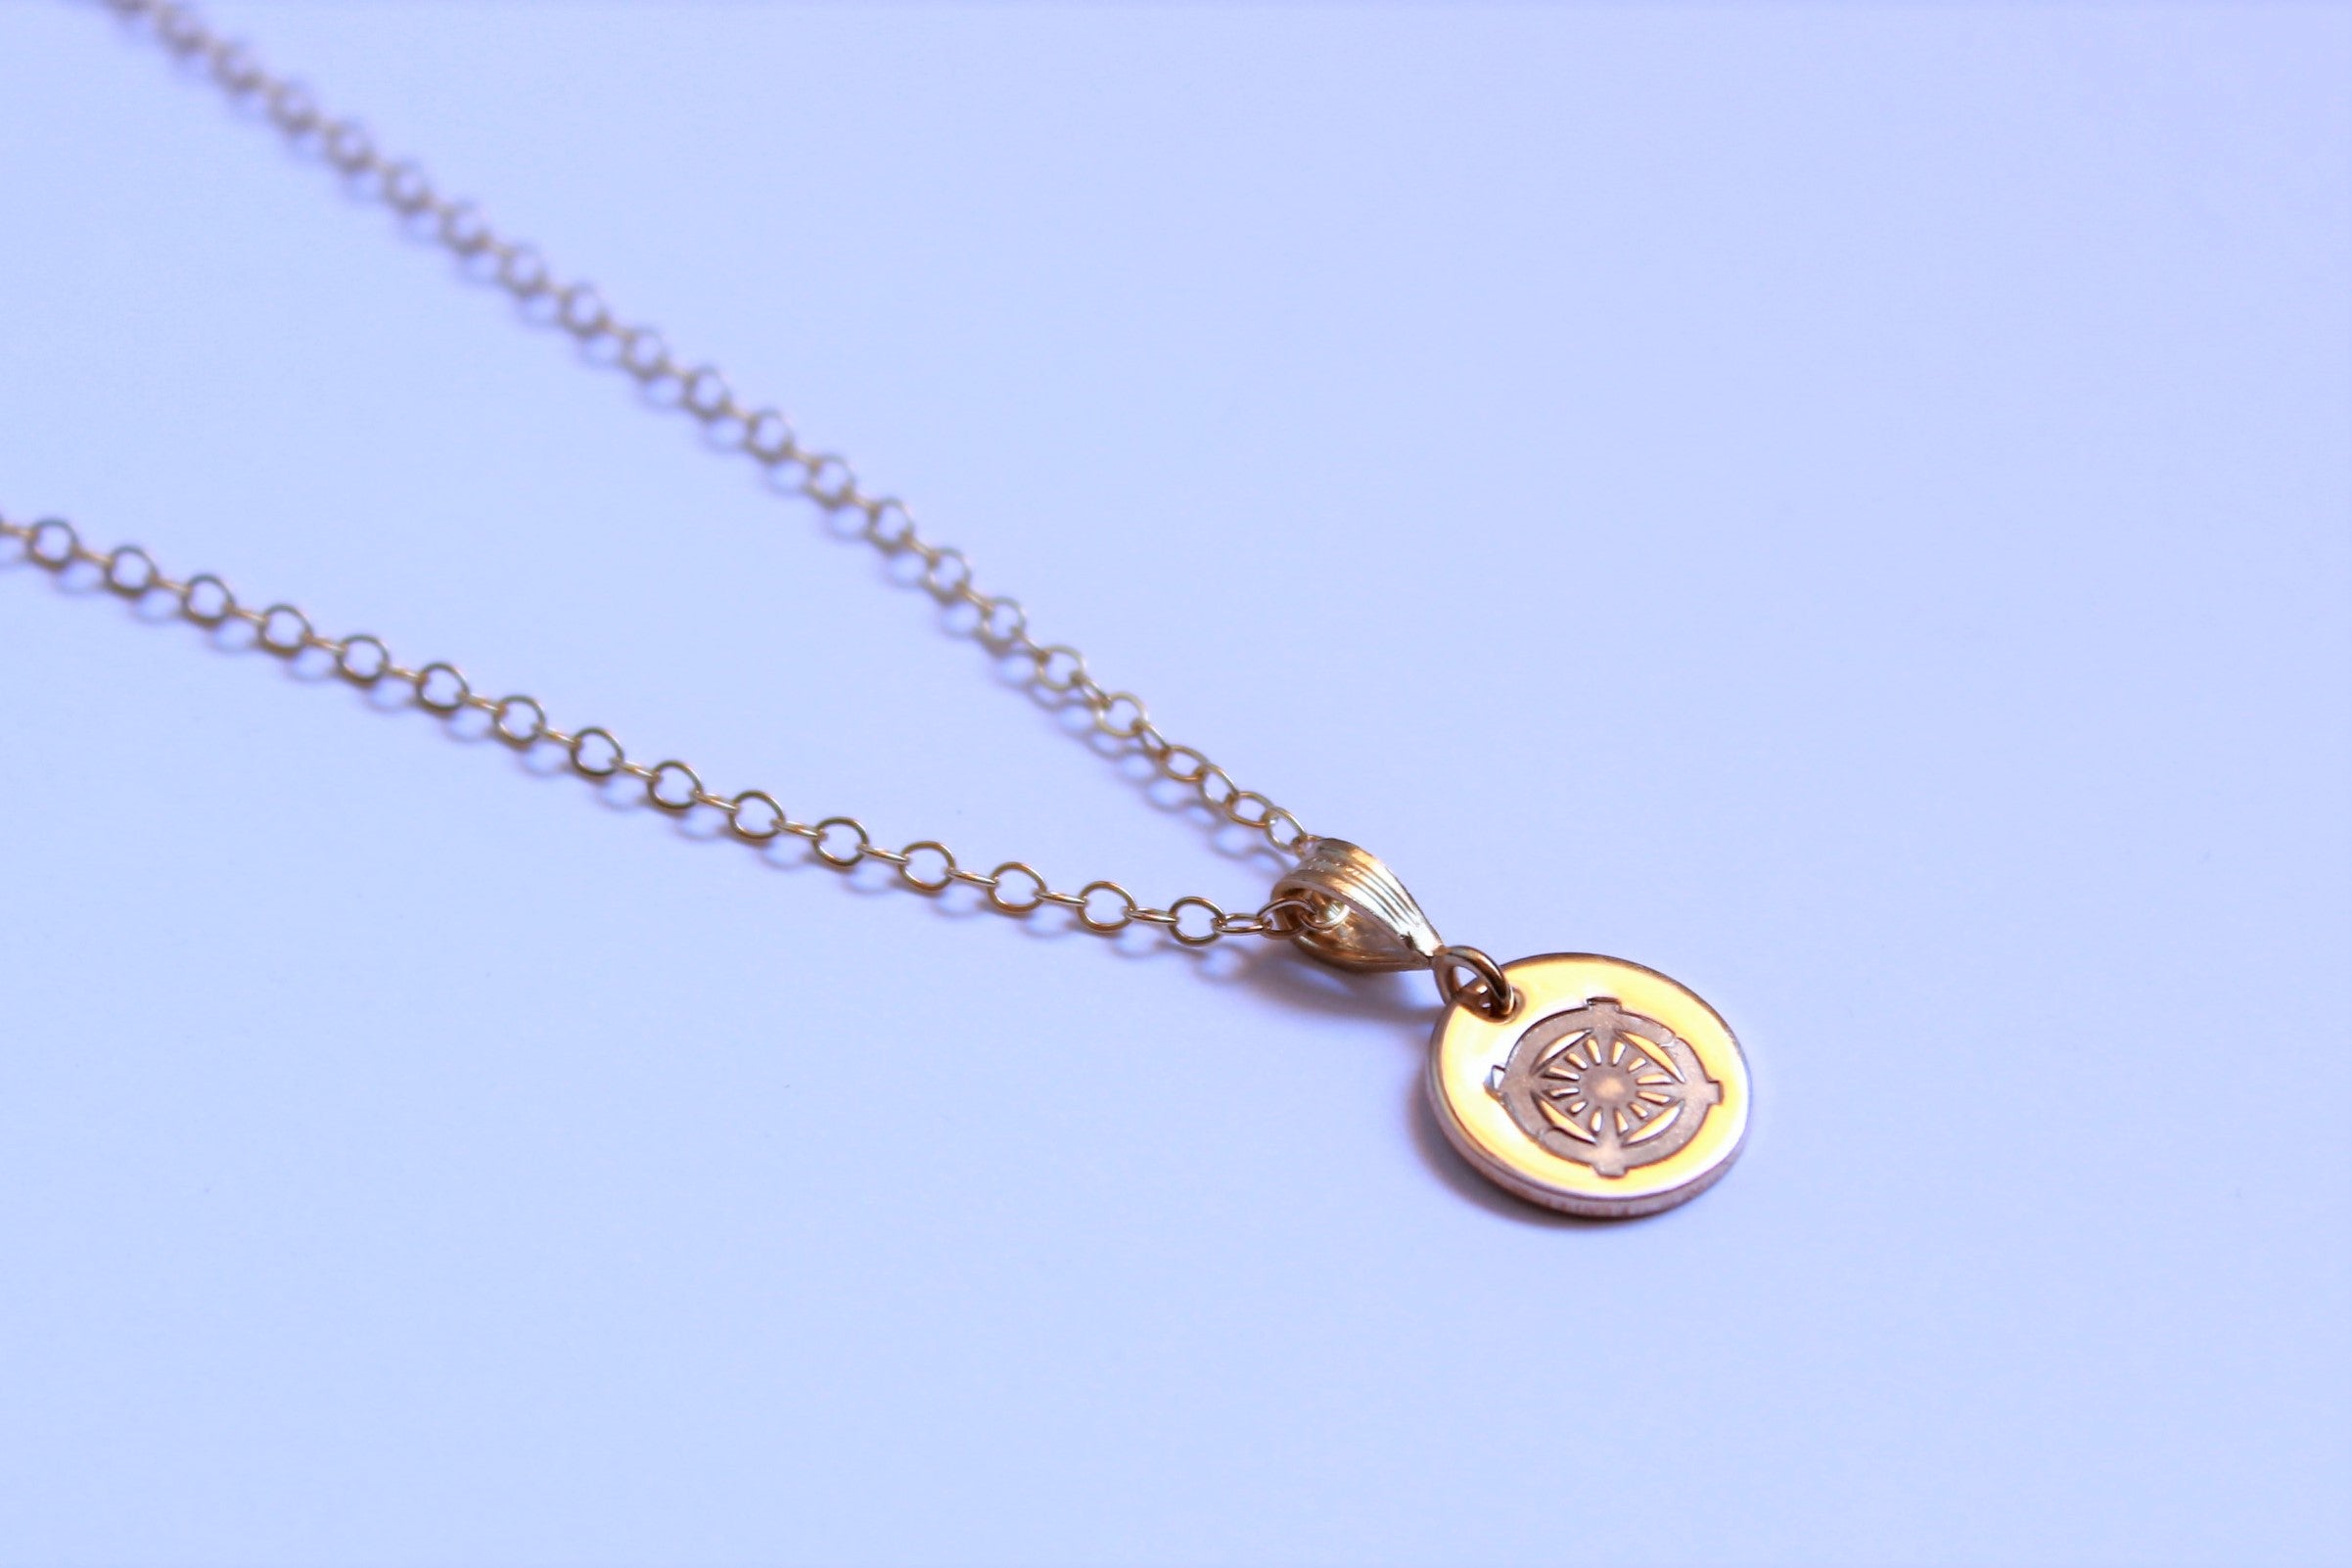 Unification Church Symbol Necklace